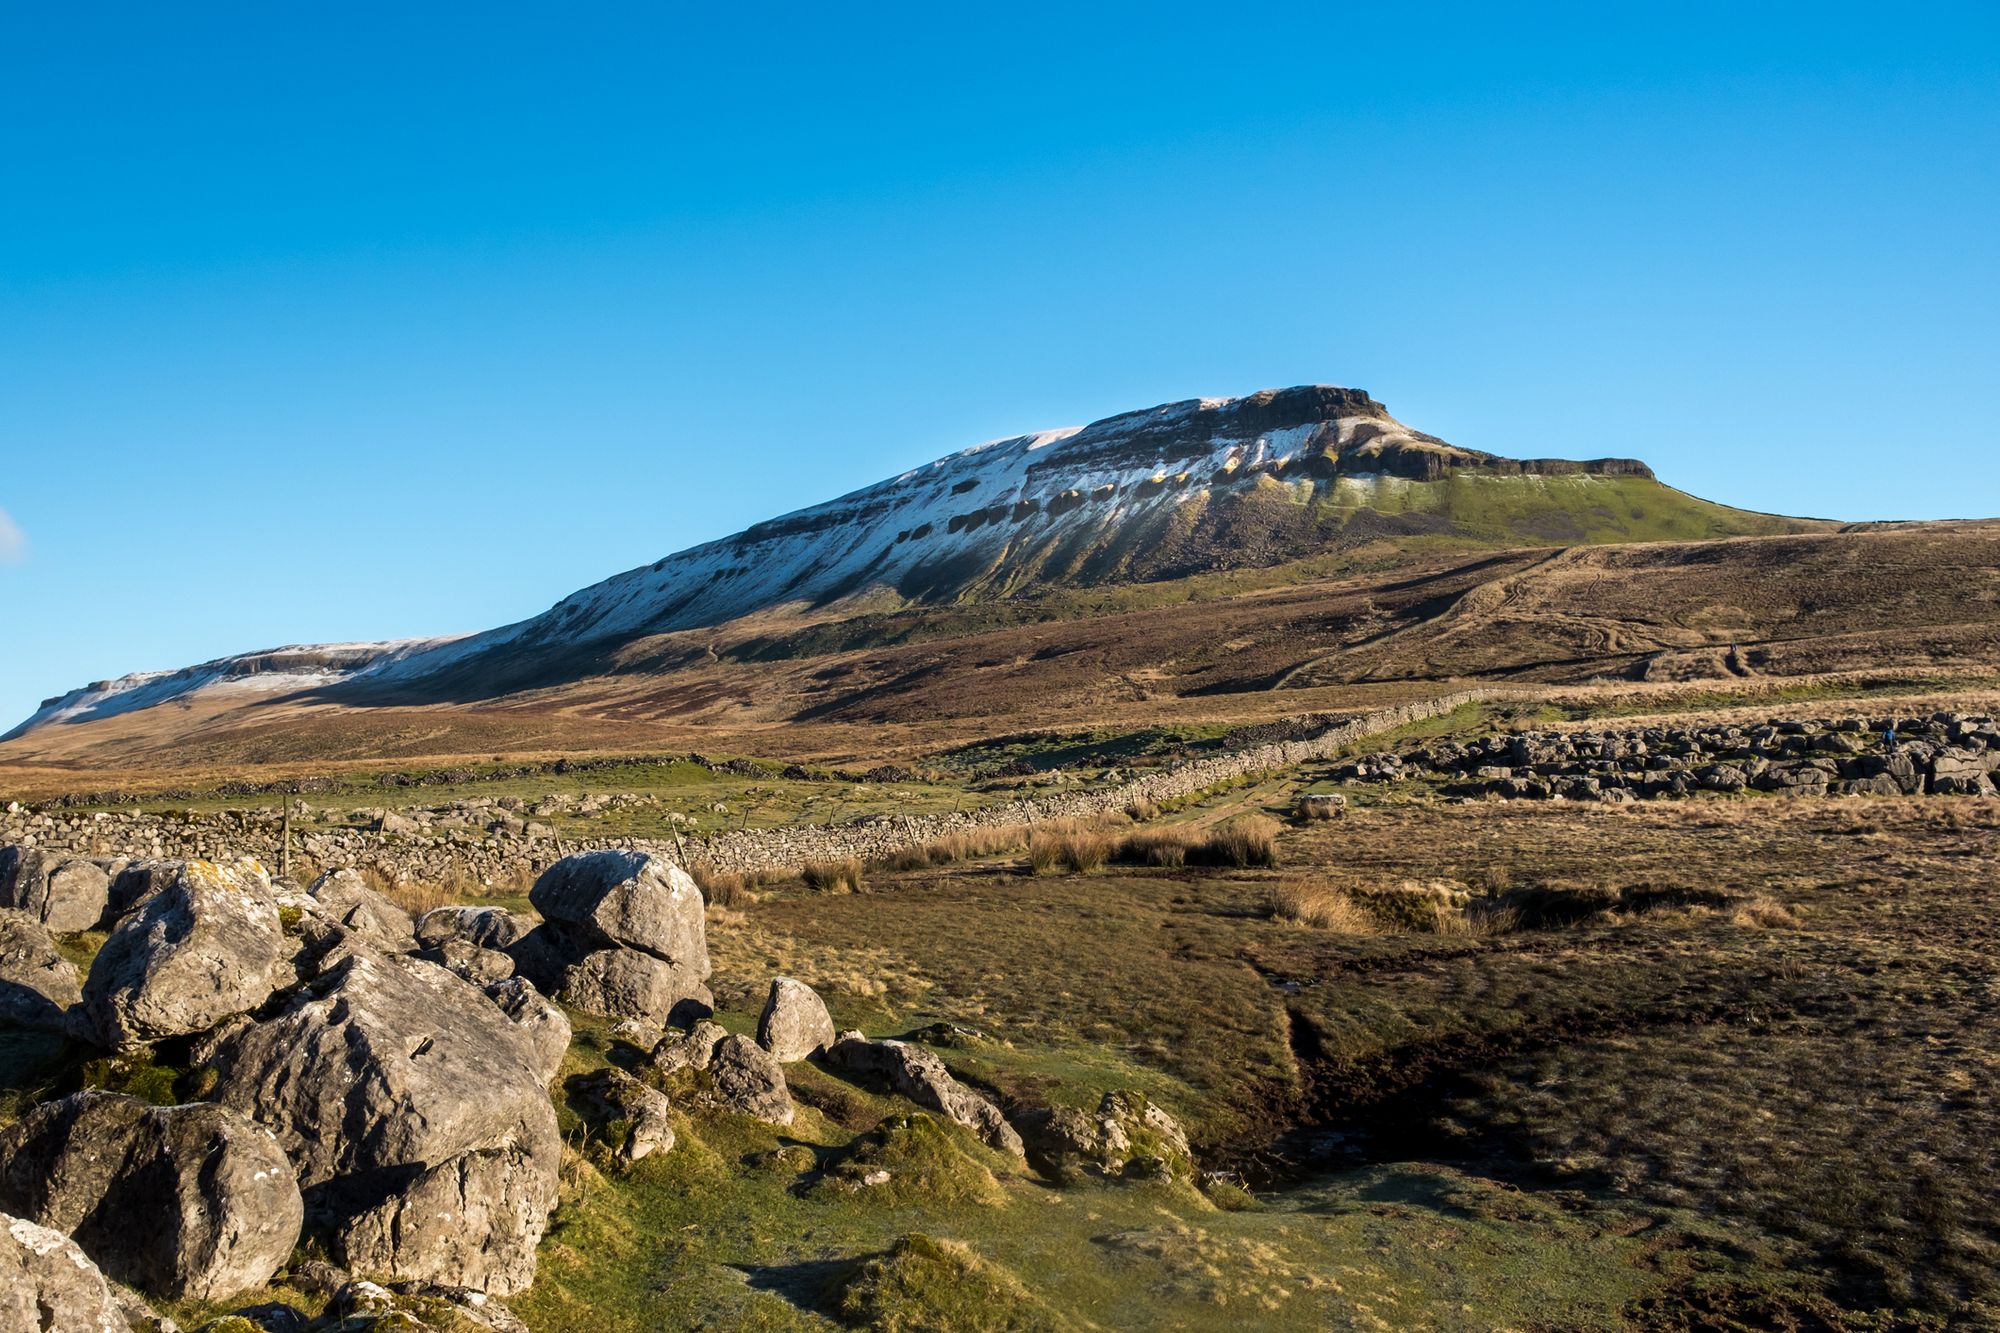 A snowy Pen-y-Ghent, in the Yorkshire Dales, home to some of the UK's best hiking